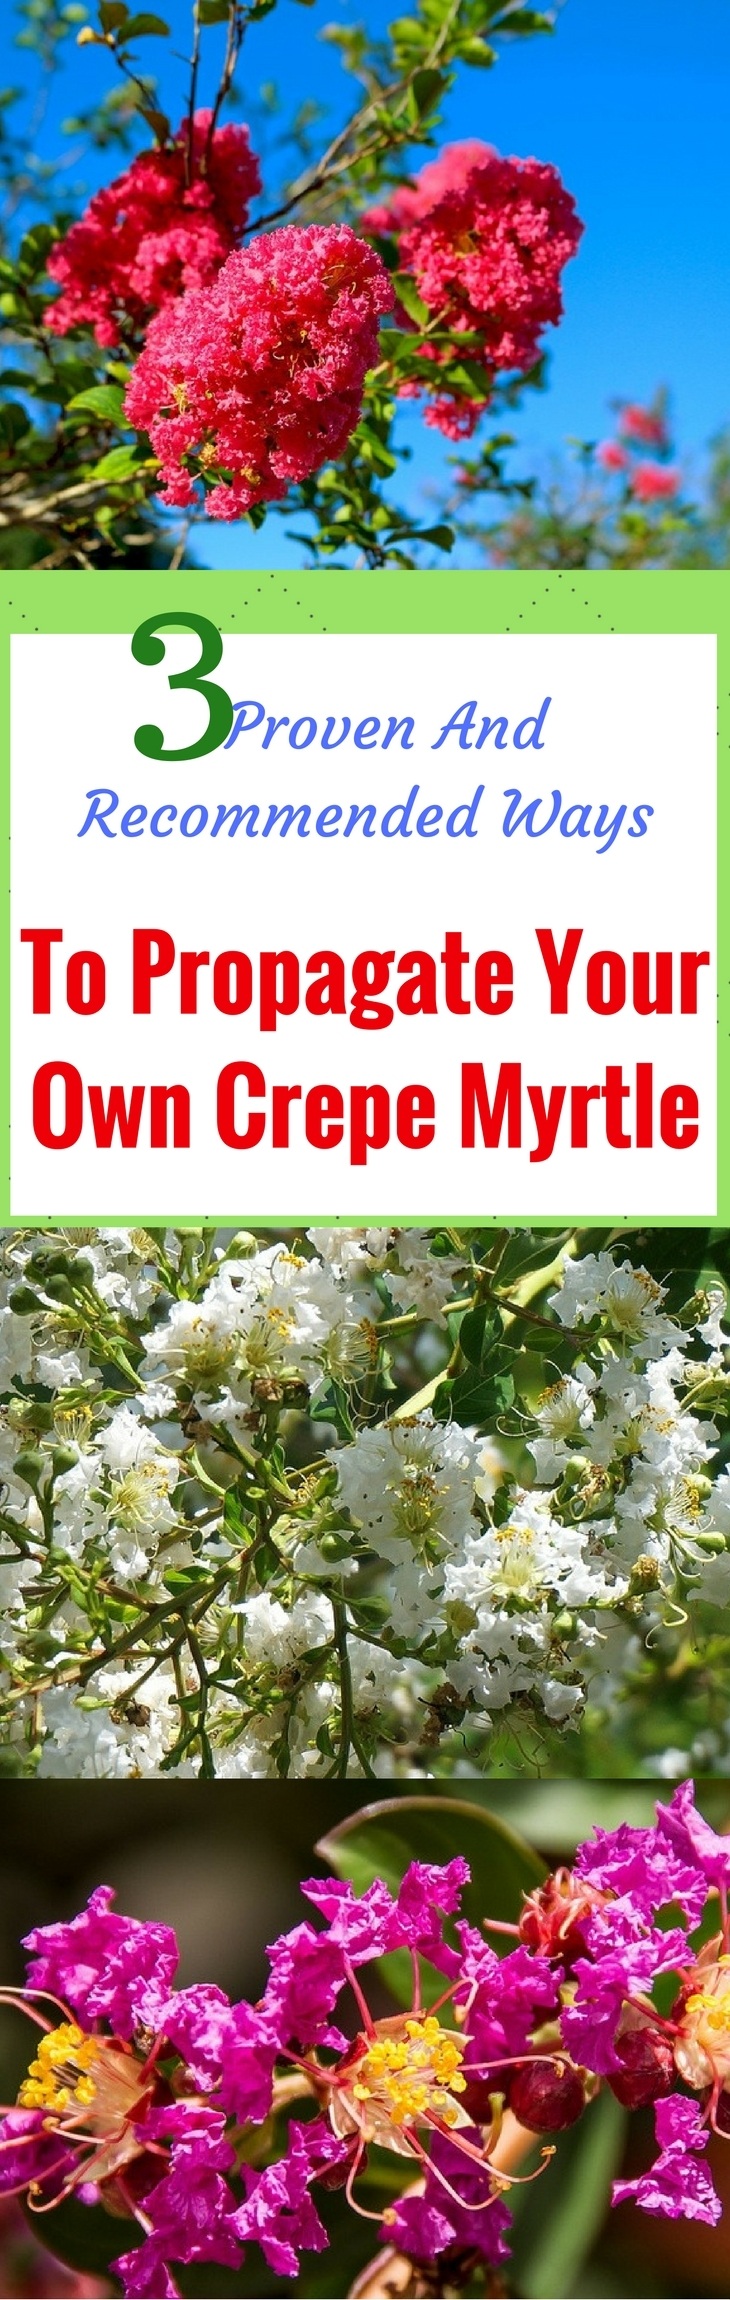 3 Proven And Recommended Ways To Propagate Your Own Crepe Myrtle